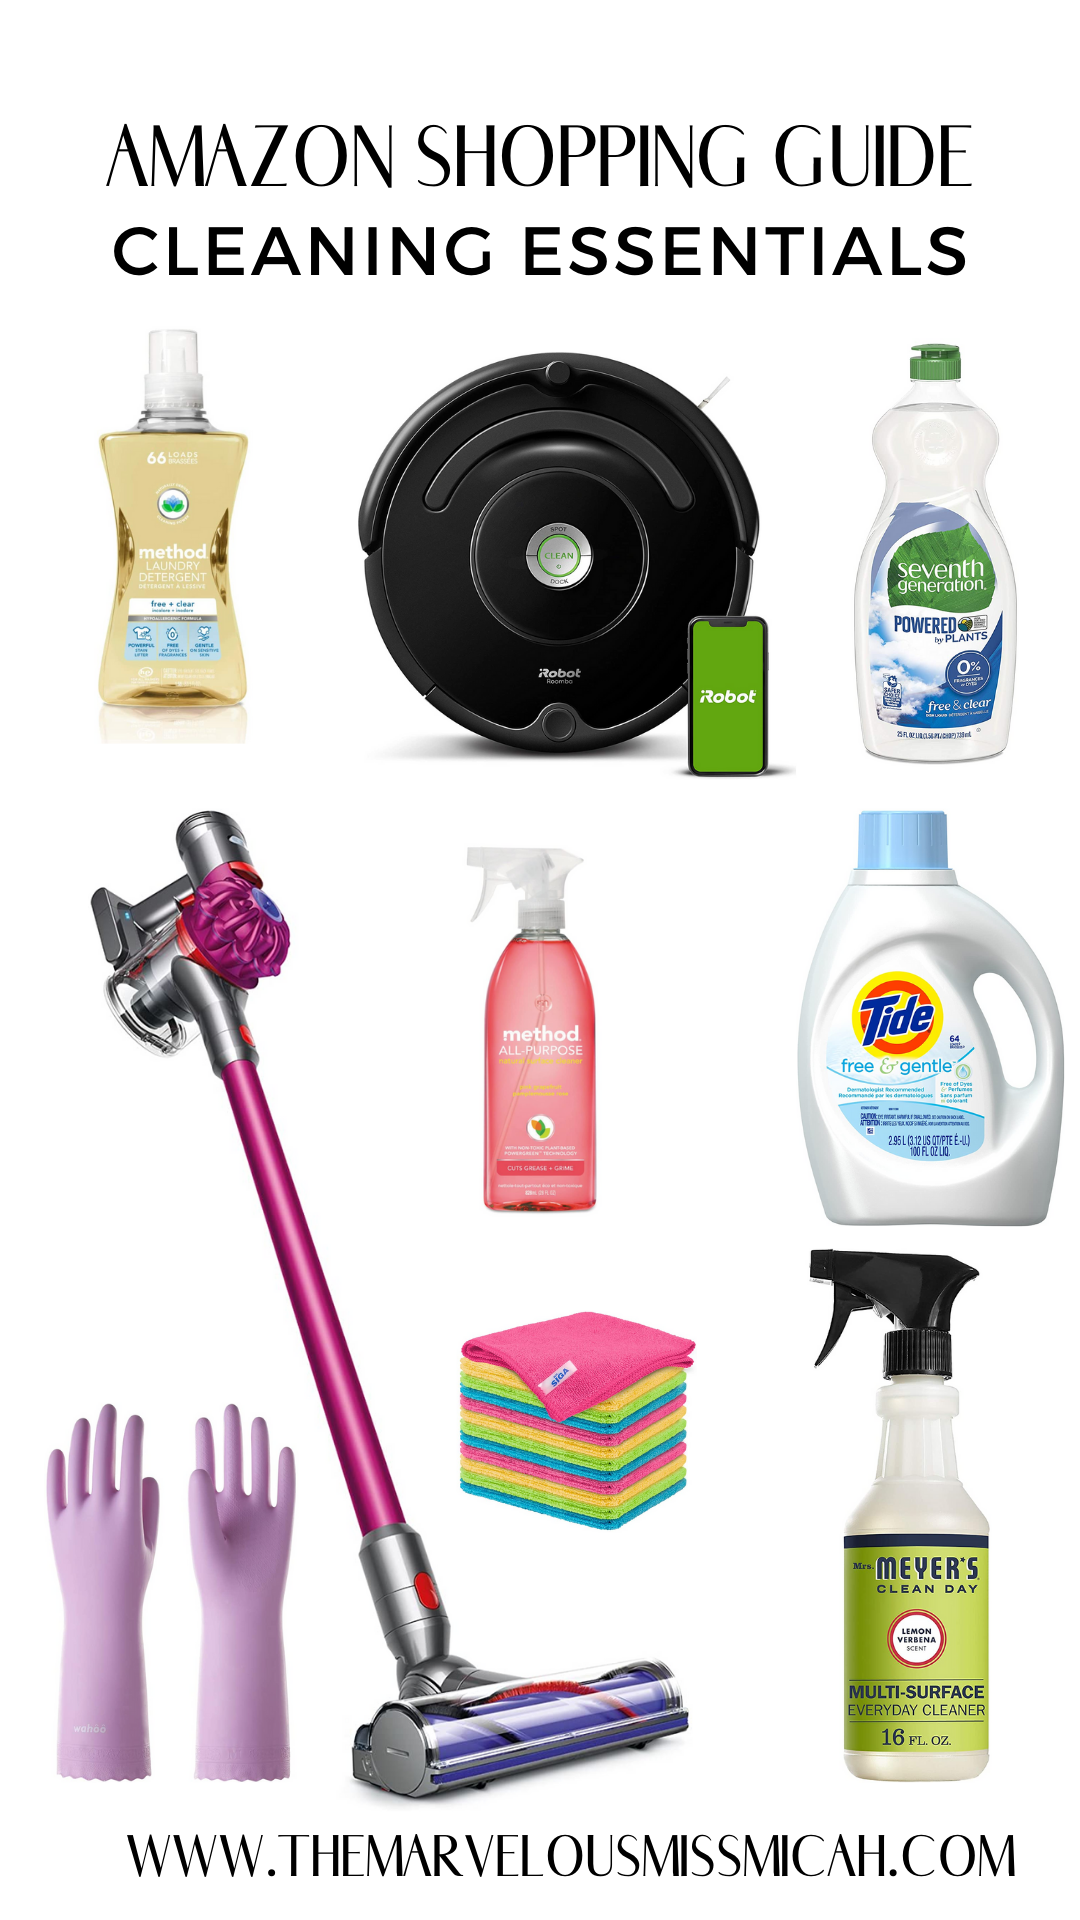 Shop for Household Essentials on  Prime Day - Best Home Deals on